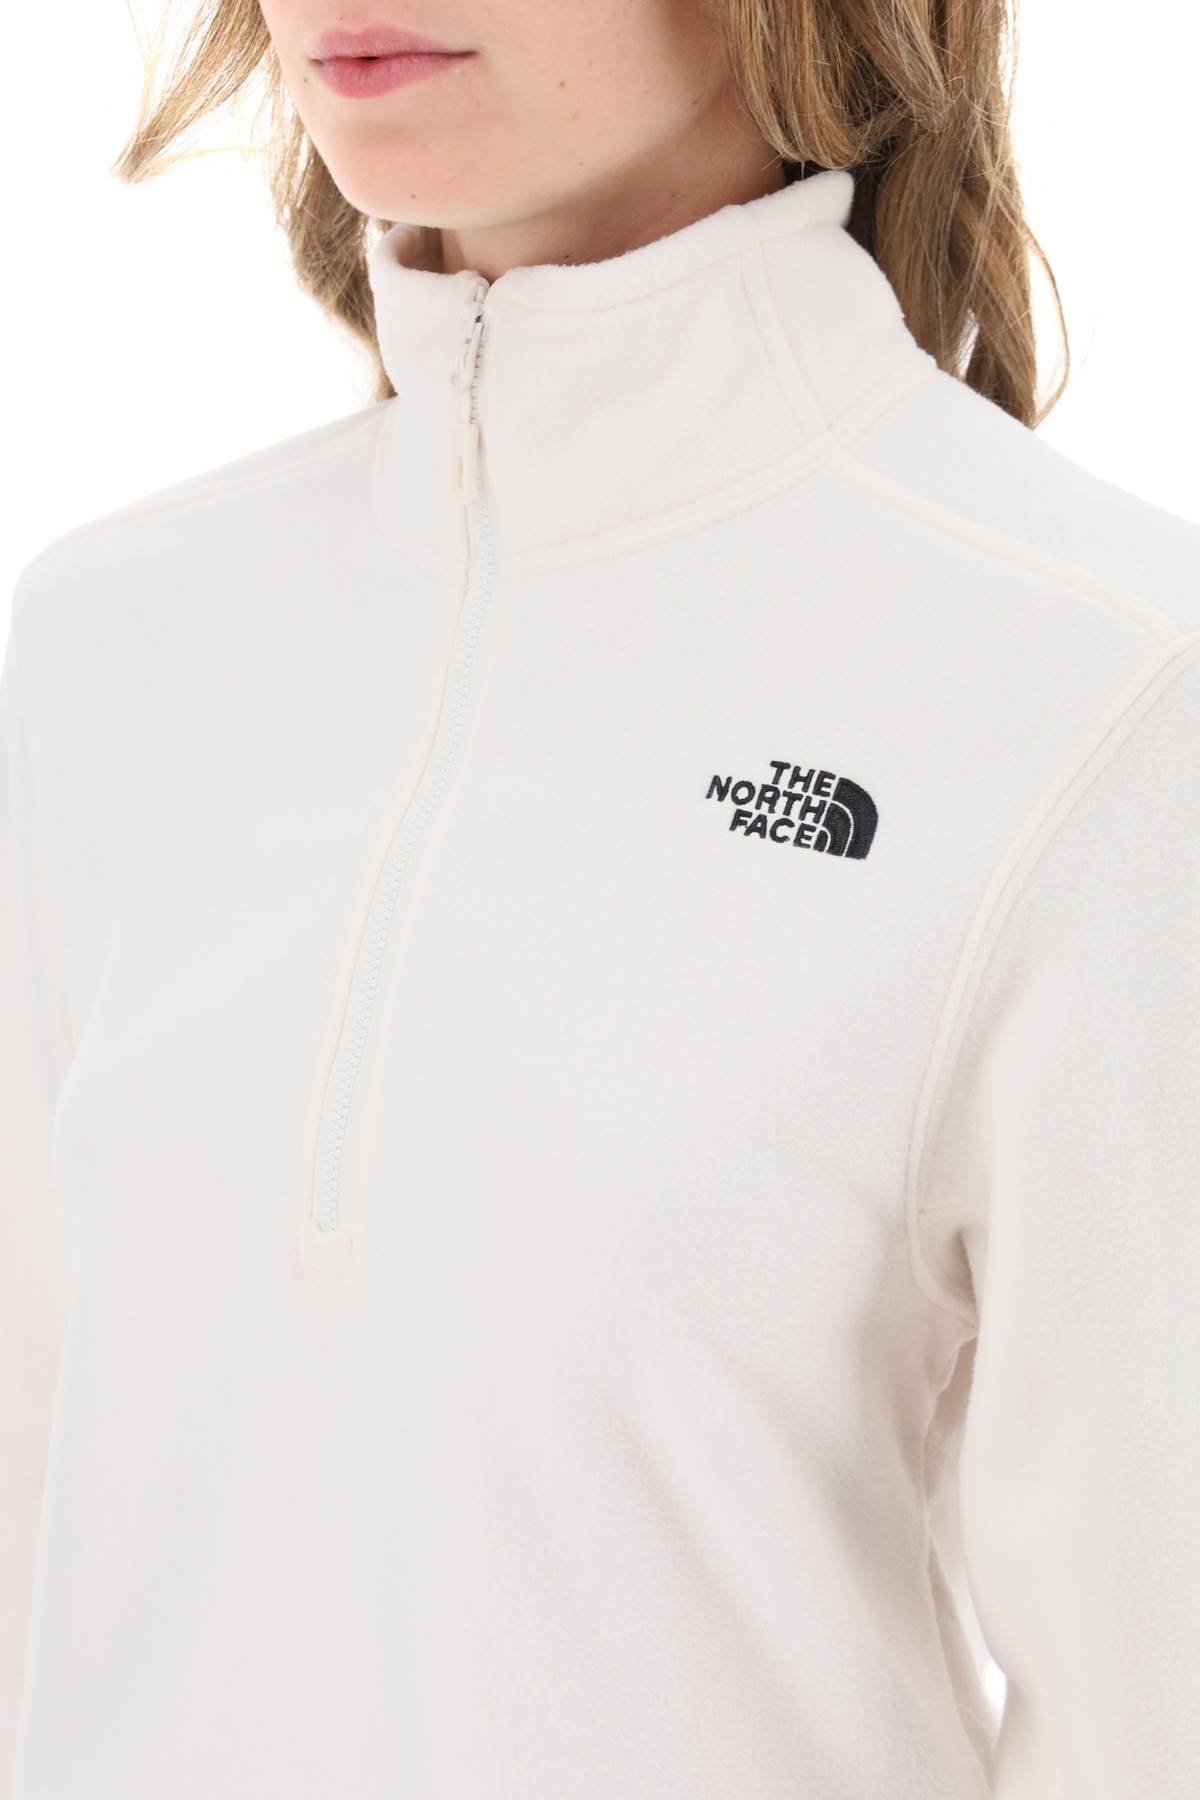 Shop The North Face Glacer Cropped Fleece Sweatshirt In Gardenia White (white)